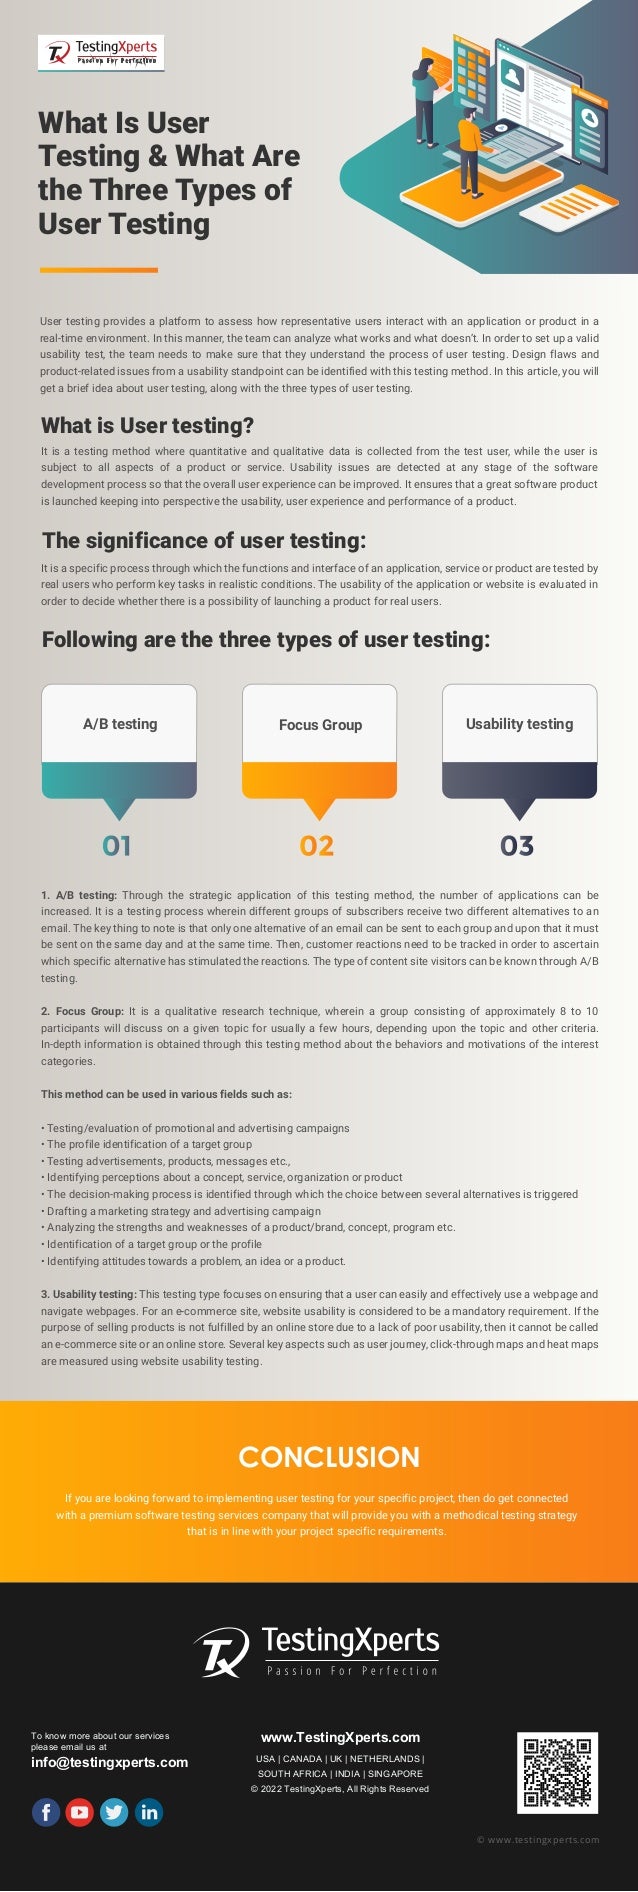 To know more about our services
please email us at
info@testingxperts.com
www.TestingXperts.com
USA | CANADA | UK | NETHERLANDS |
SOUTH AFRICA | INDIA | SINGAPORE
© 2022 TestingXperts, All Rights Reserved
© www.testingxperts.com
What Is User
Testing & What Are
the Three Types of
User Testing
User testing provides a platform to assess how representative users interact with an application or product in a
real-time environment. In this manner, the team can analyze what works and what doesn’t. In order to set up a valid
usability test, the team needs to make sure that they understand the process of user testing. Design flaws and
product-related issues from a usability standpoint can be identified with this testing method. In this article, you will
get a brief idea about user testing, along with the three types of user testing.
What is User testing?
It is a testing method where quantitative and qualitative data is collected from the test user, while the user is
subject to all aspects of a product or service. Usability issues are detected at any stage of the software
development process so that the overall user experience can be improved. It ensures that a great software product
is launched keeping into perspective the usability, user experience and performance of a product.
The significance of user testing:
It is a specific process through which the functions and interface of an application, service or product are tested by
real users who perform key tasks in realistic conditions. The usability of the application or website is evaluated in
order to decide whether there is a possibility of launching a product for real users.
Following are the three types of user testing:
1. A/B testing: Through the strategic application of this testing method, the number of applications can be
increased. It is a testing process wherein different groups of subscribers receive two different alternatives to an
email. The key thing to note is that only one alternative of an email can be sent to each group and upon that it must
be sent on the same day and at the same time. Then, customer reactions need to be tracked in order to ascertain
which specific alternative has stimulated the reactions. The type of content site visitors can be known through A/B
testing.
2. Focus Group: It is a qualitative research technique, wherein a group consisting of approximately 8 to 10
participants will discuss on a given topic for usually a few hours, depending upon the topic and other criteria.
In-depth information is obtained through this testing method about the behaviors and motivations of the interest
categories.
This method can be used in various fields such as:
• Testing/evaluation of promotional and advertising campaigns
• The profile identification of a target group
• Testing advertisements, products, messages etc.,
• Identifying perceptions about a concept, service, organization or product
• The decision-making process is identified through which the choice between several alternatives is triggered
• Drafting a marketing strategy and advertising campaign
• Analyzing the strengths and weaknesses of a product/brand, concept, program etc.
• Identification of a target group or the profile
• Identifying attitudes towards a problem, an idea or a product.
3. Usability testing: This testing type focuses on ensuring that a user can easily and effectively use a webpage and
navigate webpages. For an e-commerce site, website usability is considered to be a mandatory requirement. If the
purpose of selling products is not fulfilled by an online store due to a lack of poor usability, then it cannot be called
an e-commerce site or an online store. Several key aspects such as user journey, click-through maps and heat maps
are measured using website usability testing.
If you are looking forward to implementing user testing for your specific project, then do get connected
with a premium software testing services company that will provide you with a methodical testing strategy
that is in line with your project specific requirements.
CONCLUSION
A/B testing Focus Group Usability testing
 